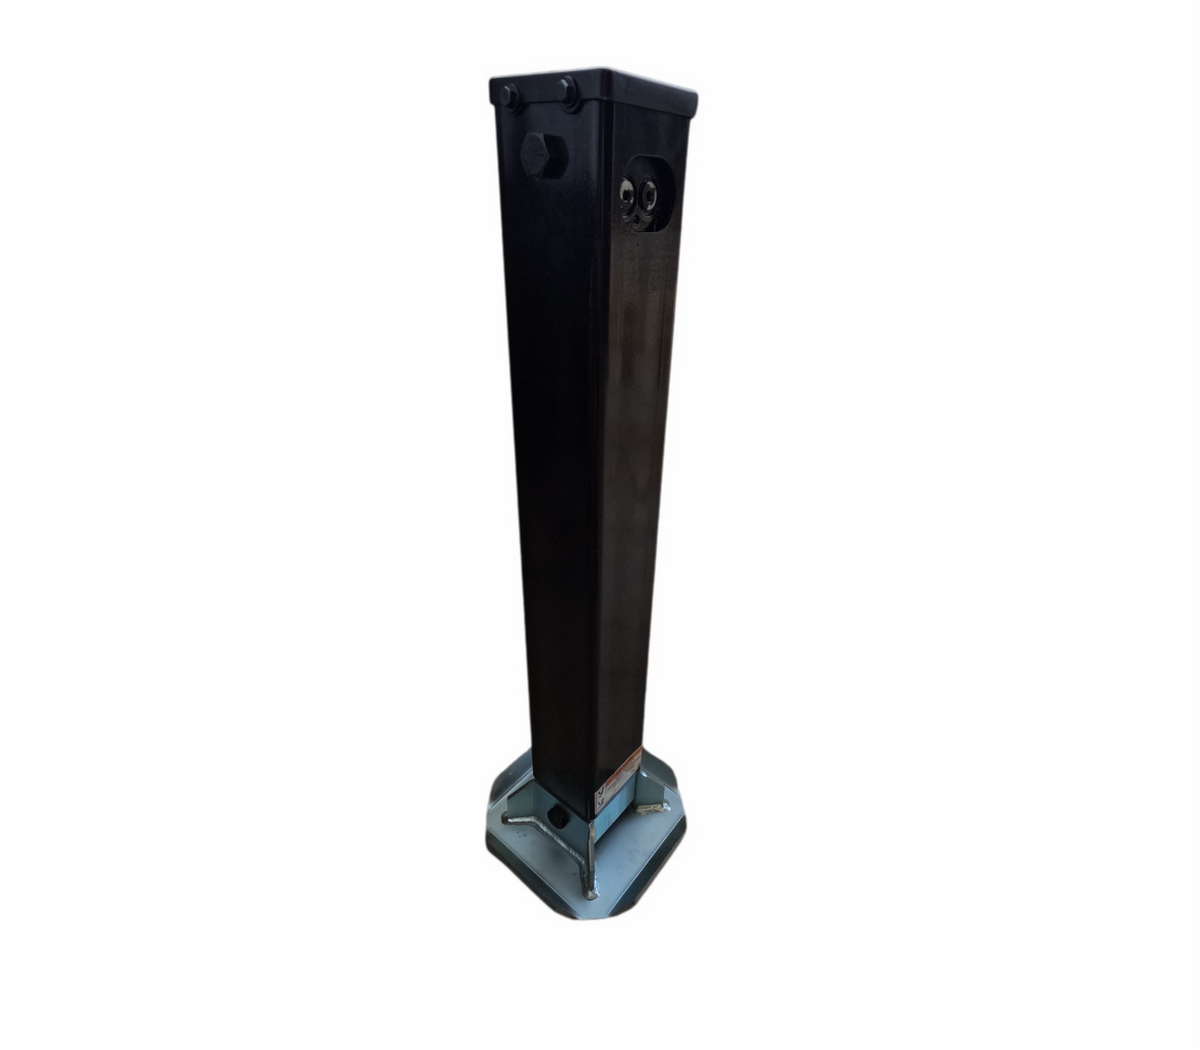 A black hydraulic trailer jack with a metal base and a screw, showcasing a durable design for towing reliability.